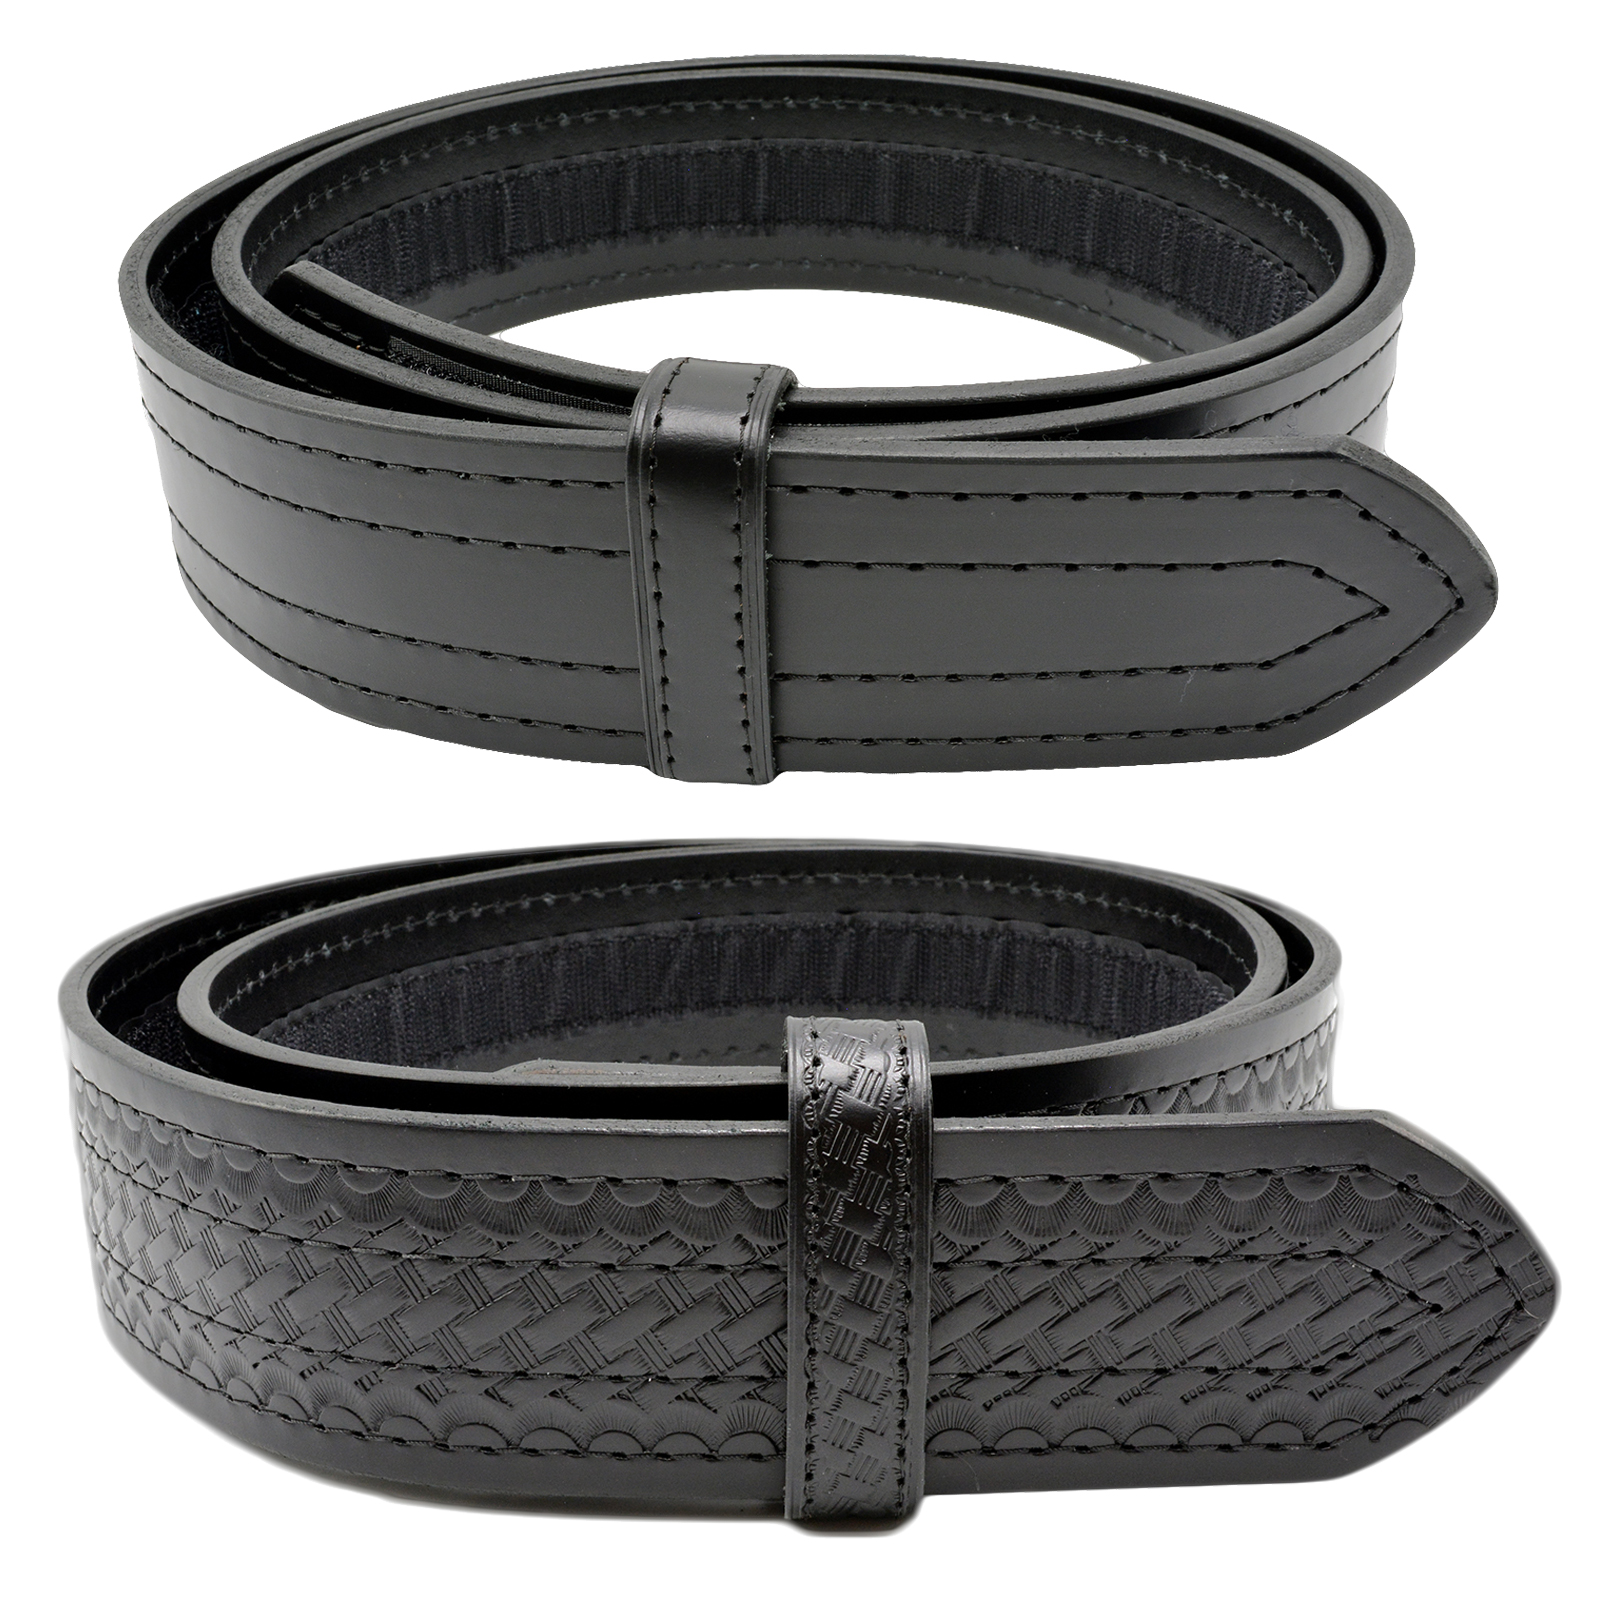 Perfect Fit Duty Belt Keepers 1 Genuine Leather - 4 Pack